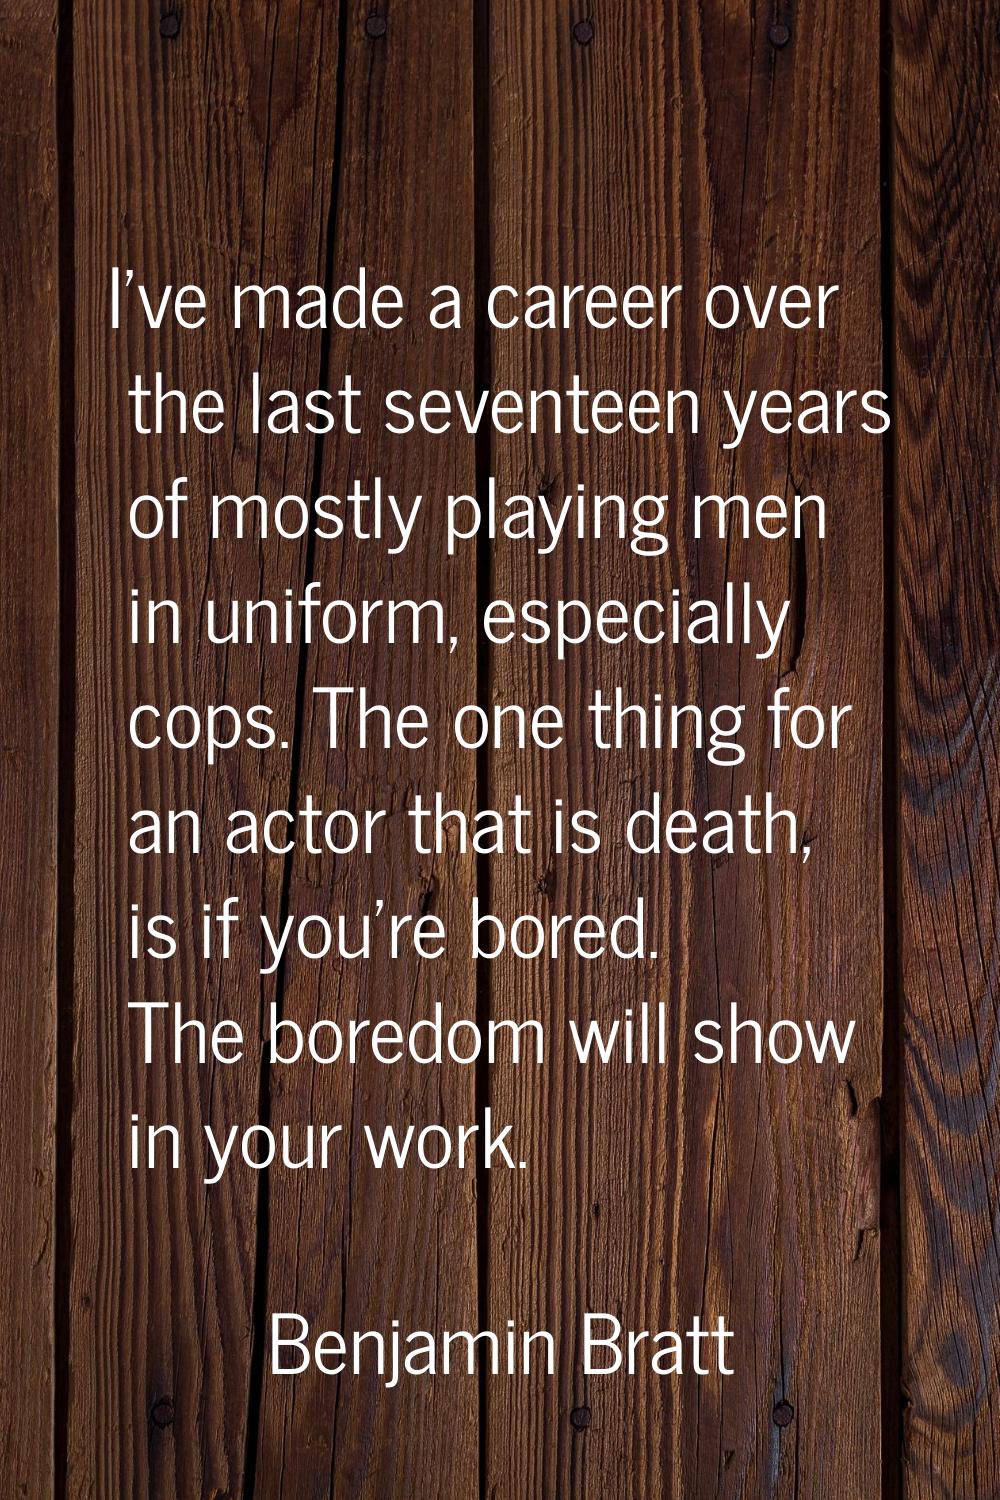 I've made a career over the last seventeen years of mostly playing men in uniform, especially cops.